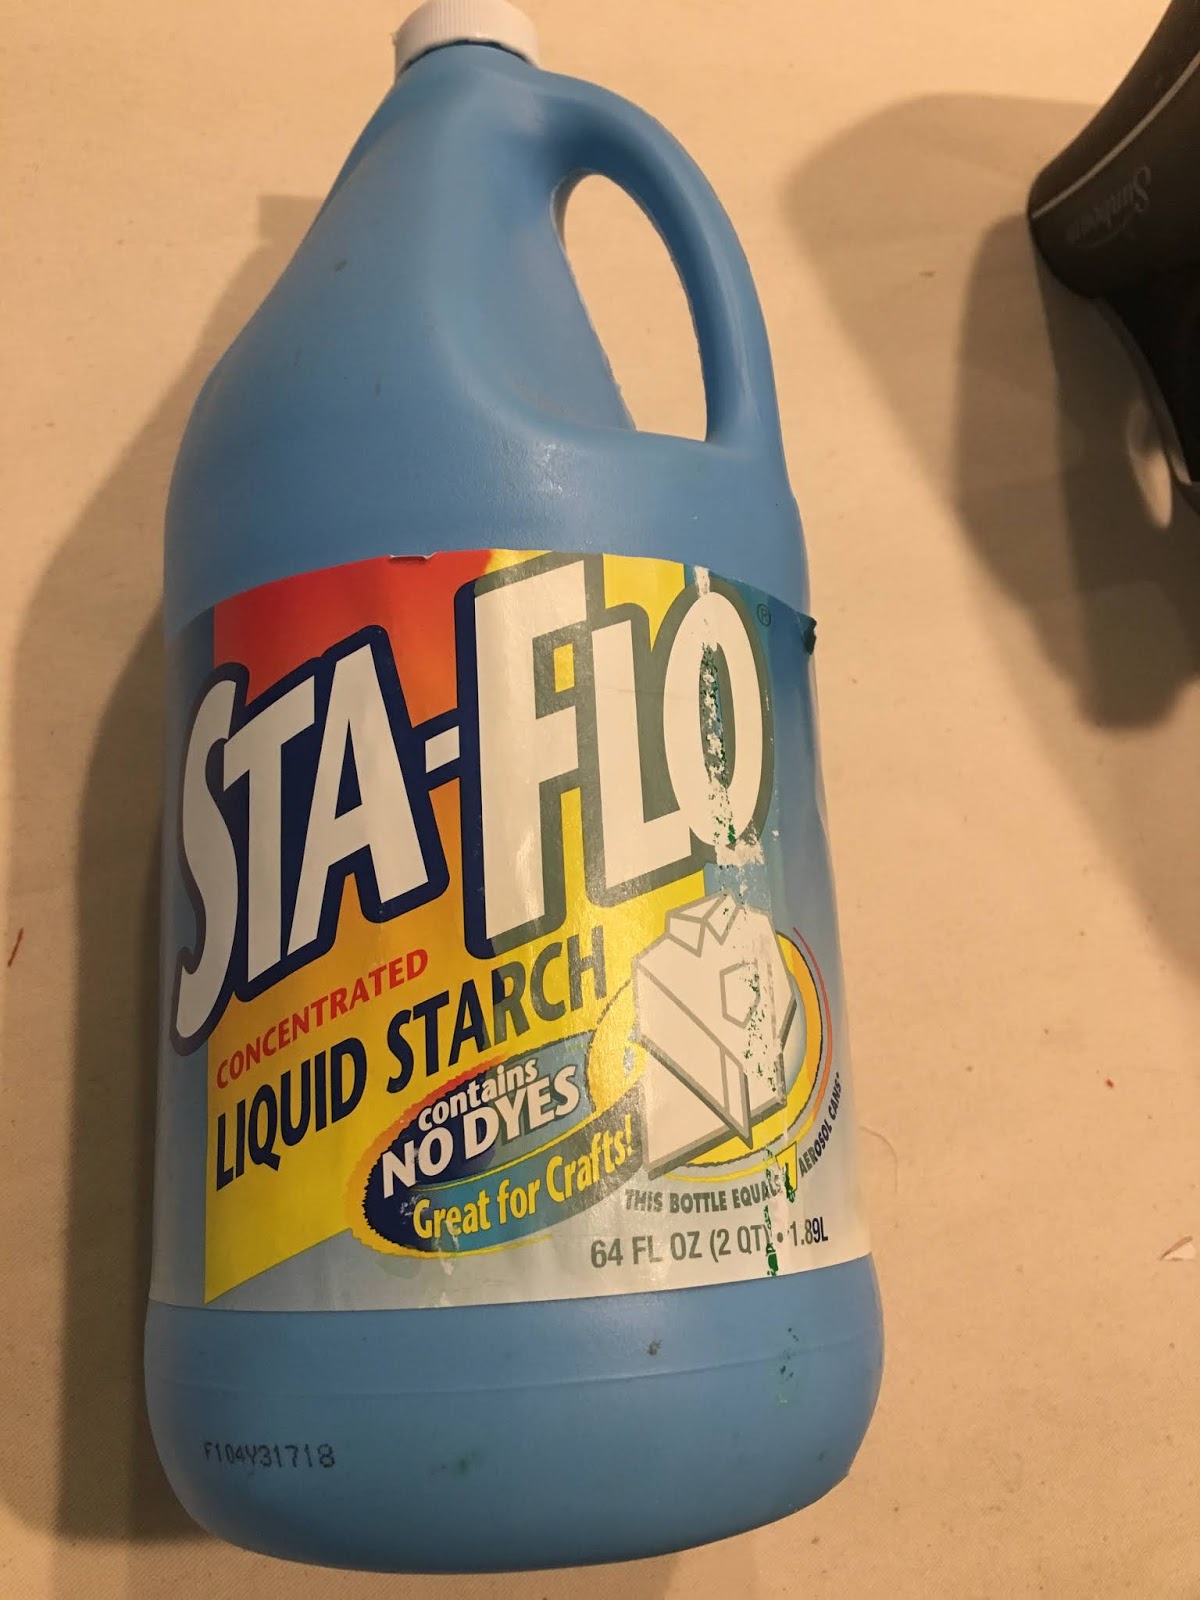 Sta-flo Concentrated Liquid Starch 64 FL Oz No Dyes Crafts Clothes